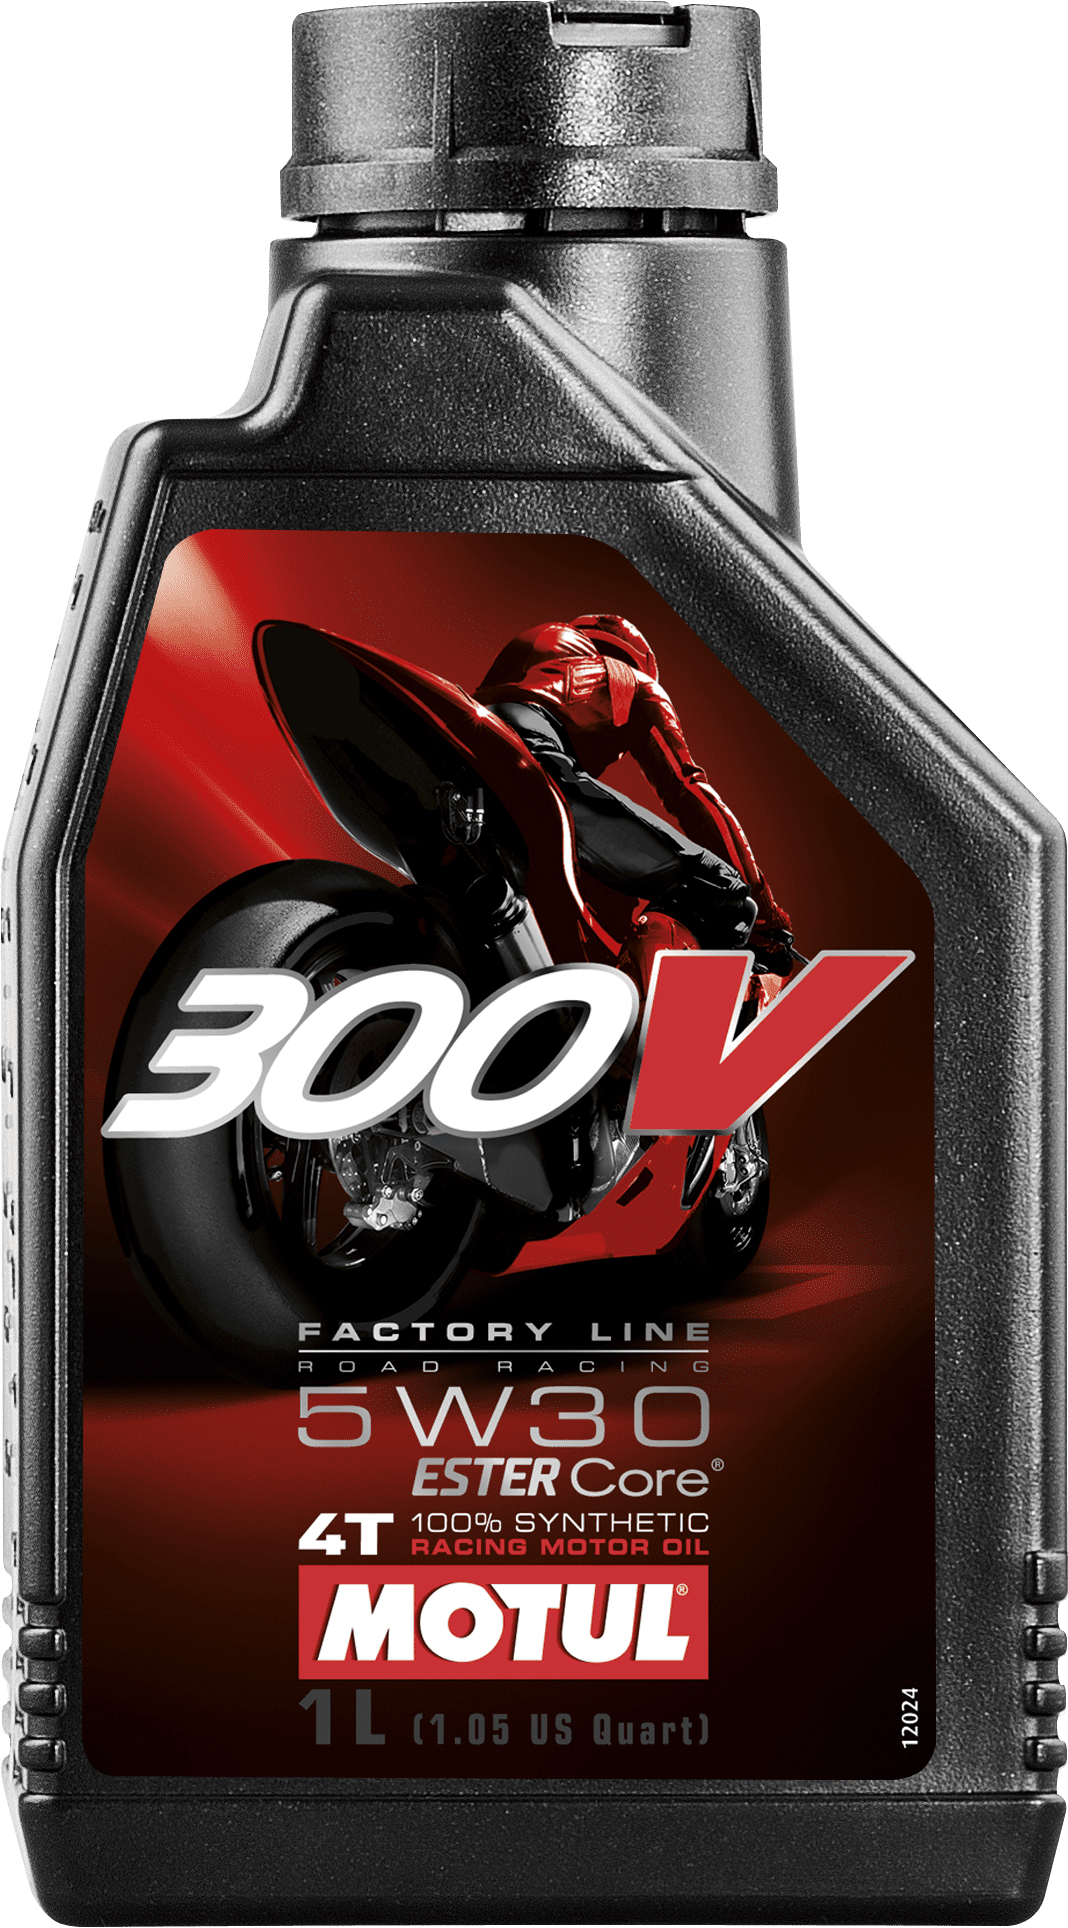 104108-1 100% Synthetic racing motor oil. Based on ESTER Core® technology and above all existing motorsport standards.